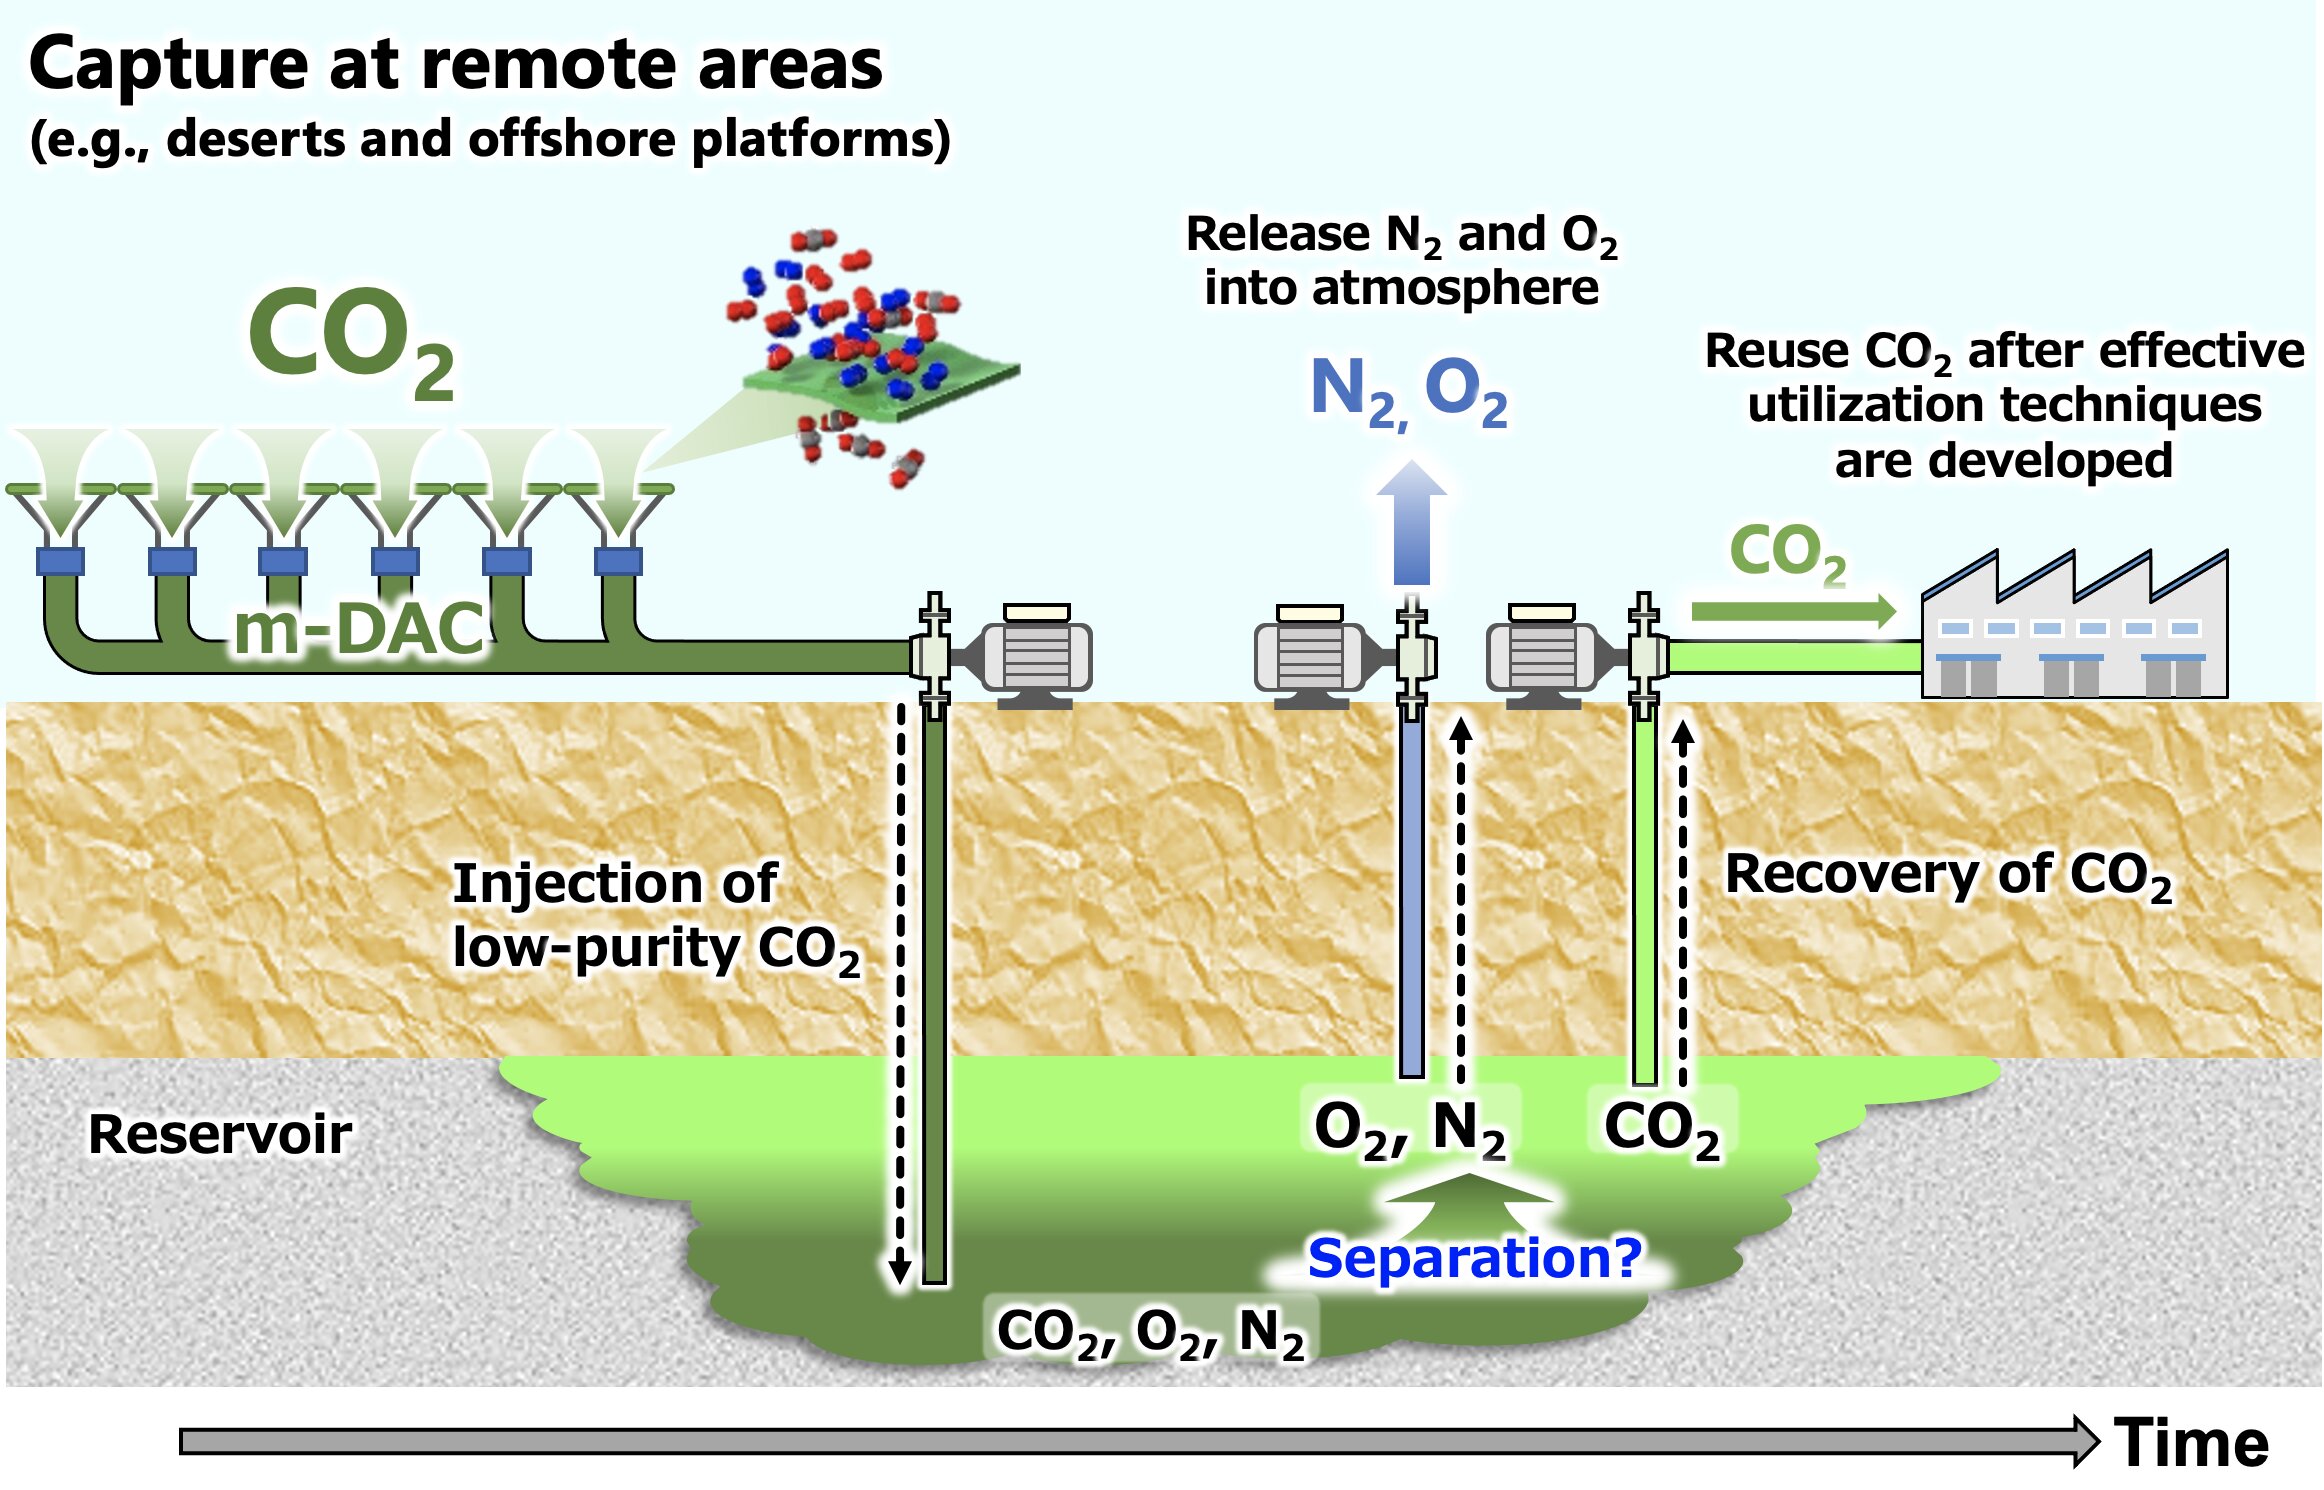 Underground gas storage as a promising natural methane bioreactor and  reservoir? - ScienceDirect